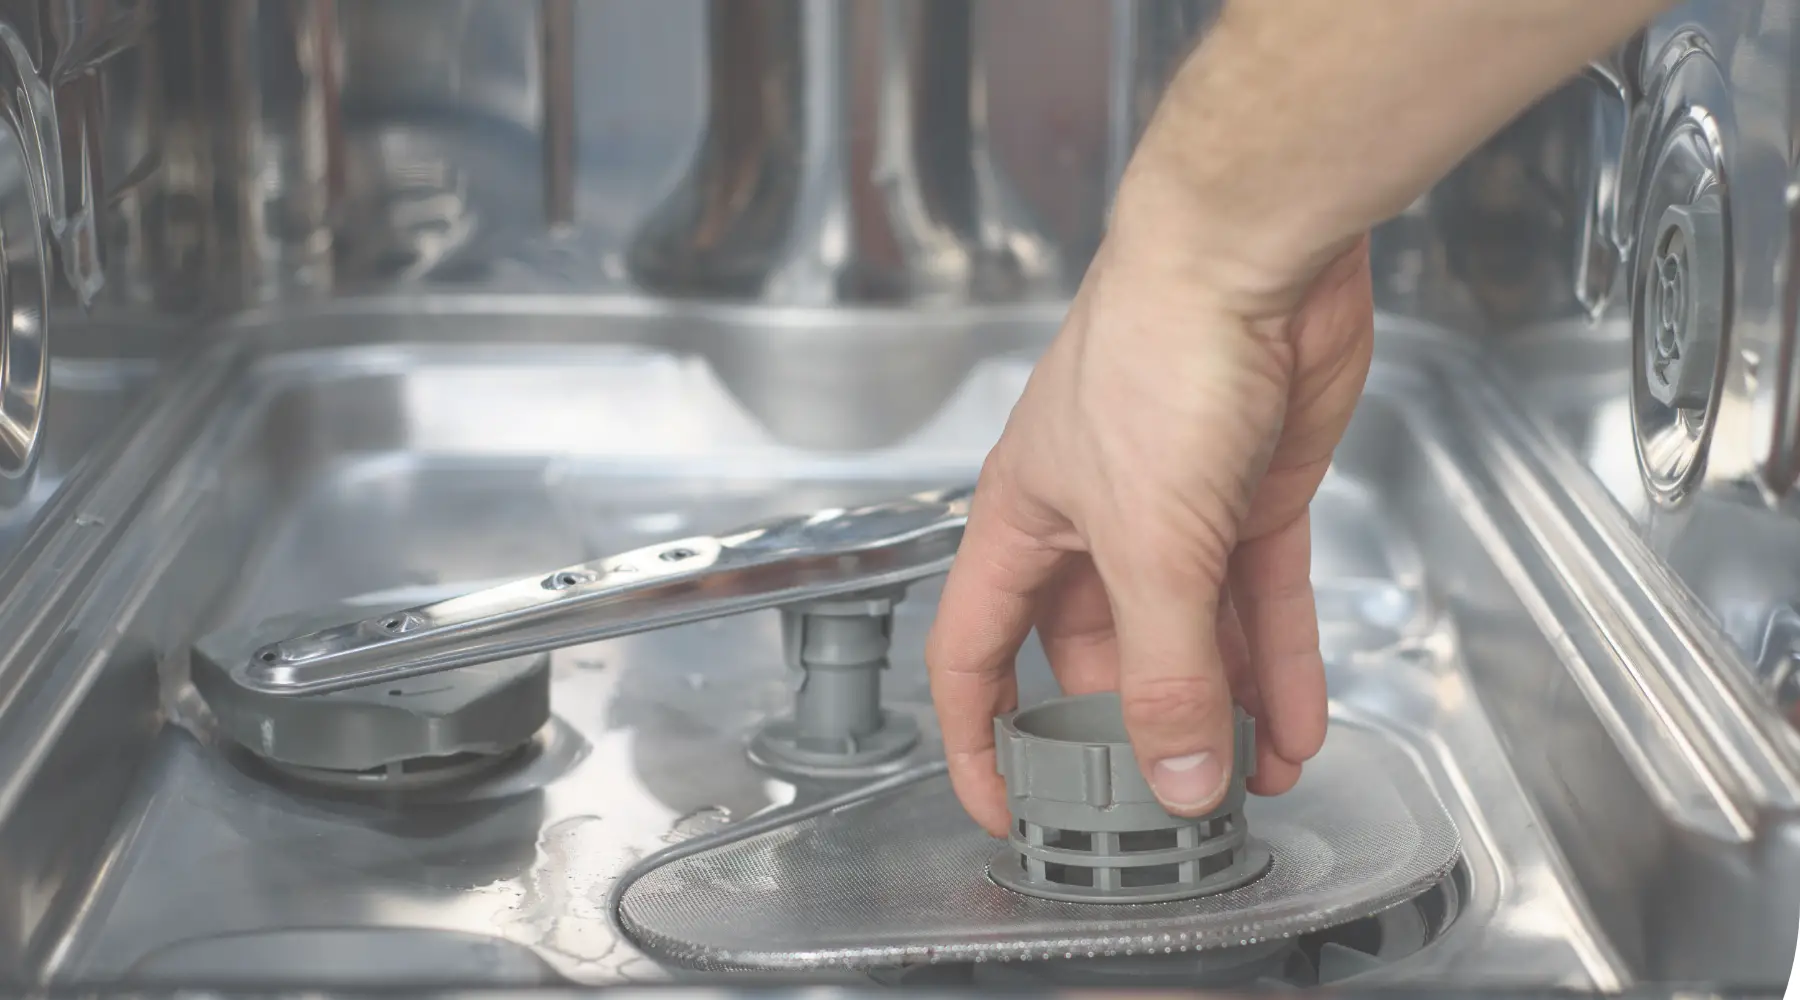 How To Fix A Dishwasher That Gets No Water